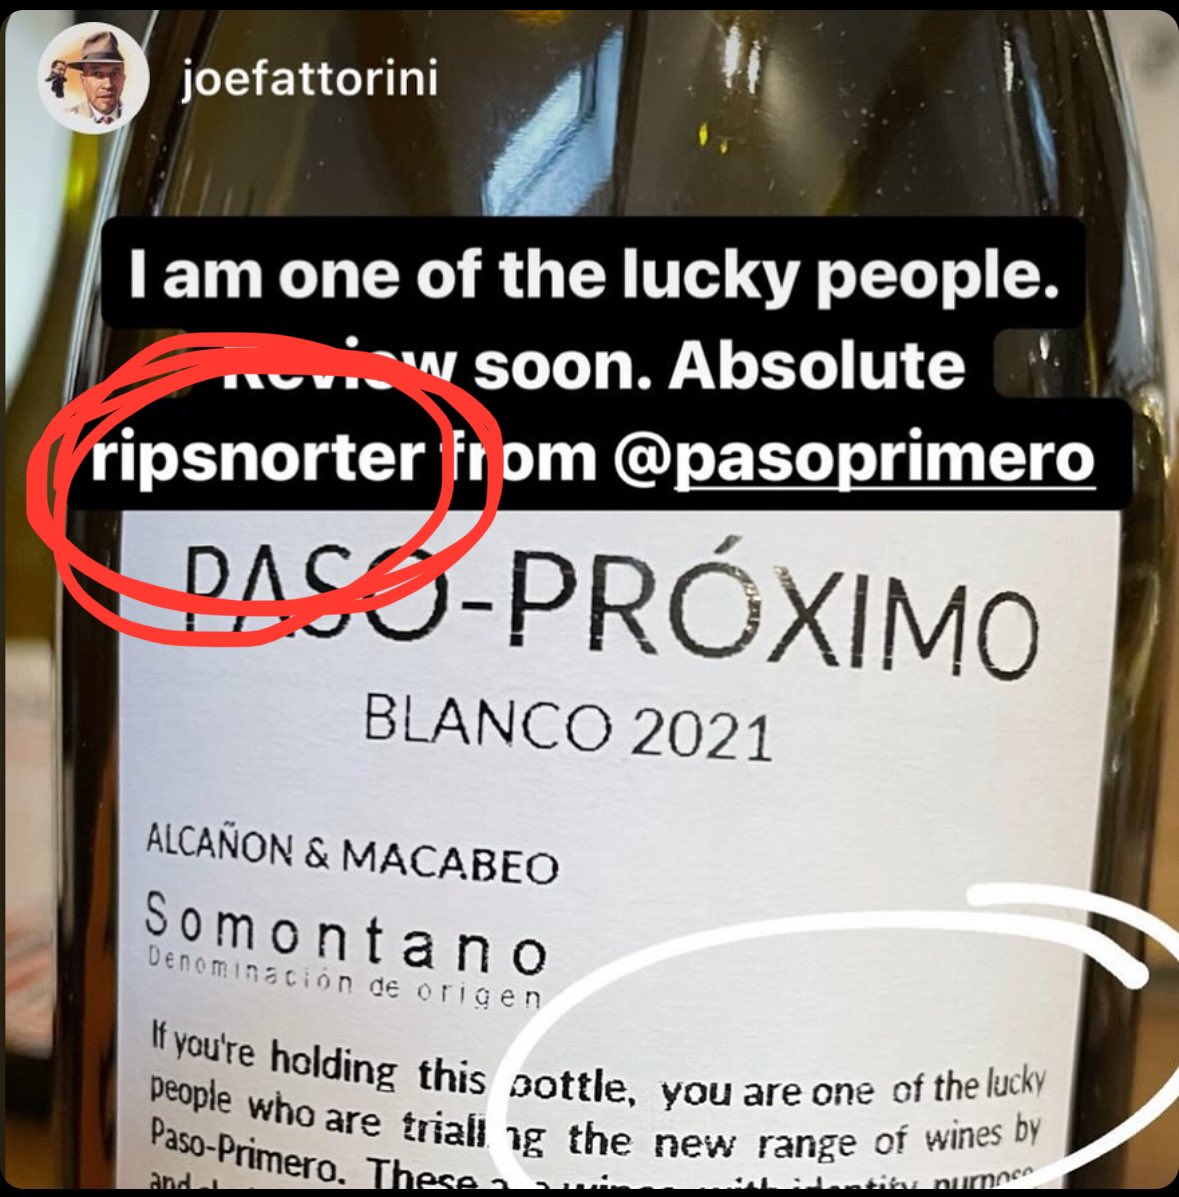 Any advice on how to translate ‘Ripsnorter’ into Spanish? I’m trying to explain to the team in Spain that it’s a good thing but I’m struggling to figure out the equivalent!